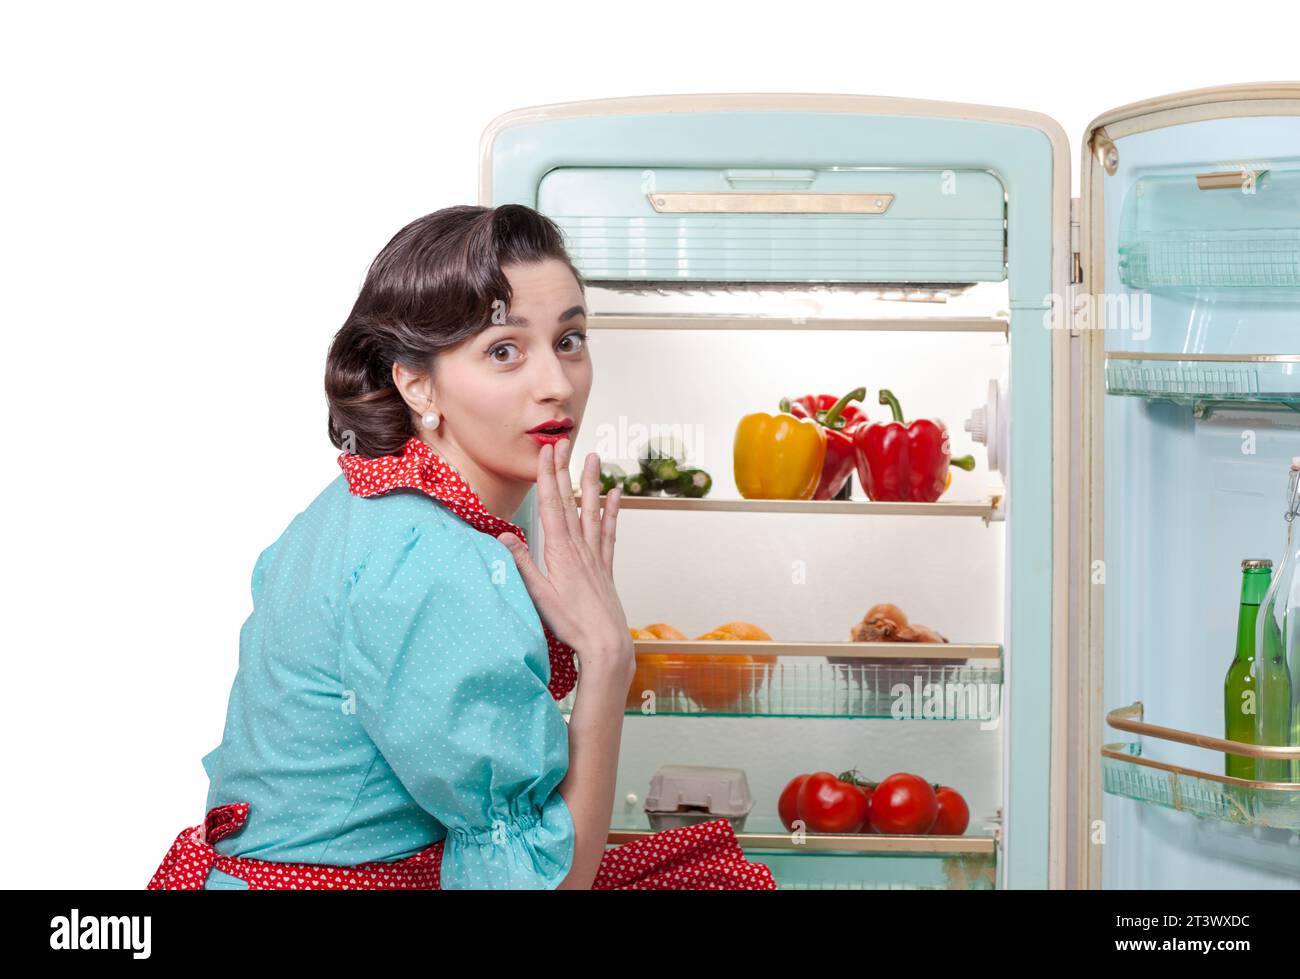 Vintage style housewife in the kitchen preparing lunch, she is opening the fridge and looking at camera Stock Photo